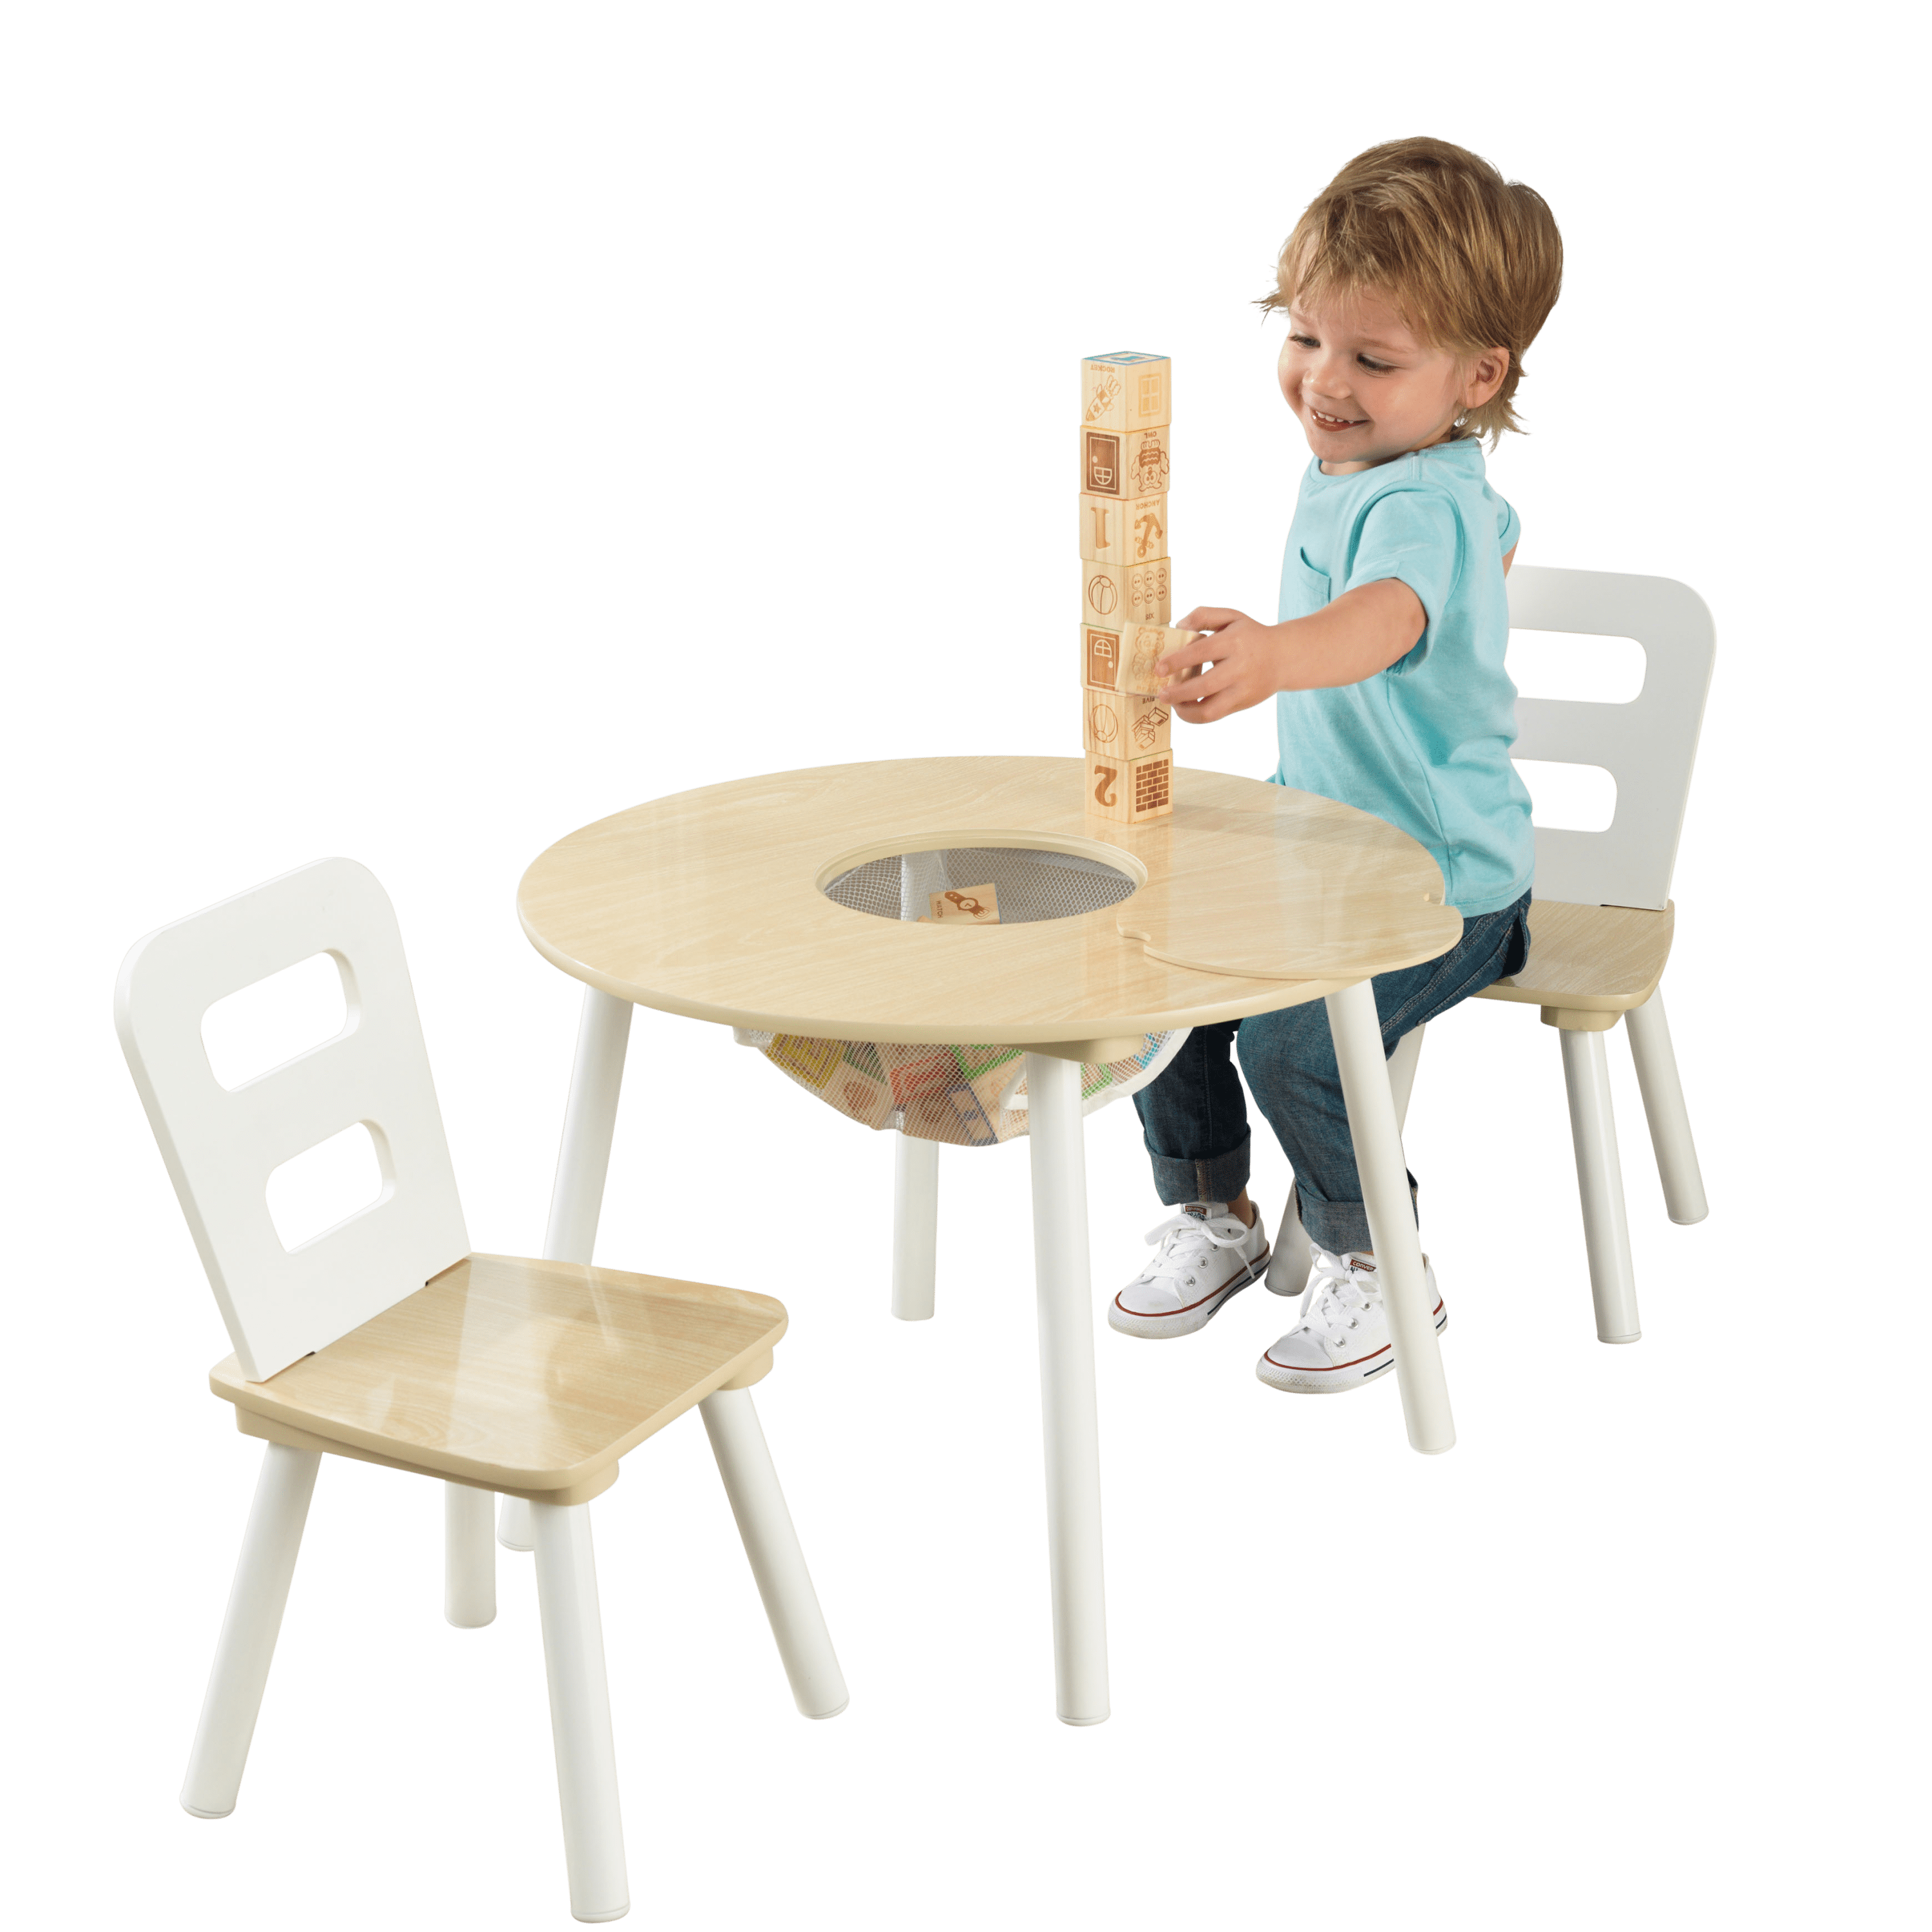 USA Kids Table&2 Chairs Set Set for Boys Or Girls Toddler Alonea Plastic Kids Table and 2 Chairs Set Light Blue 